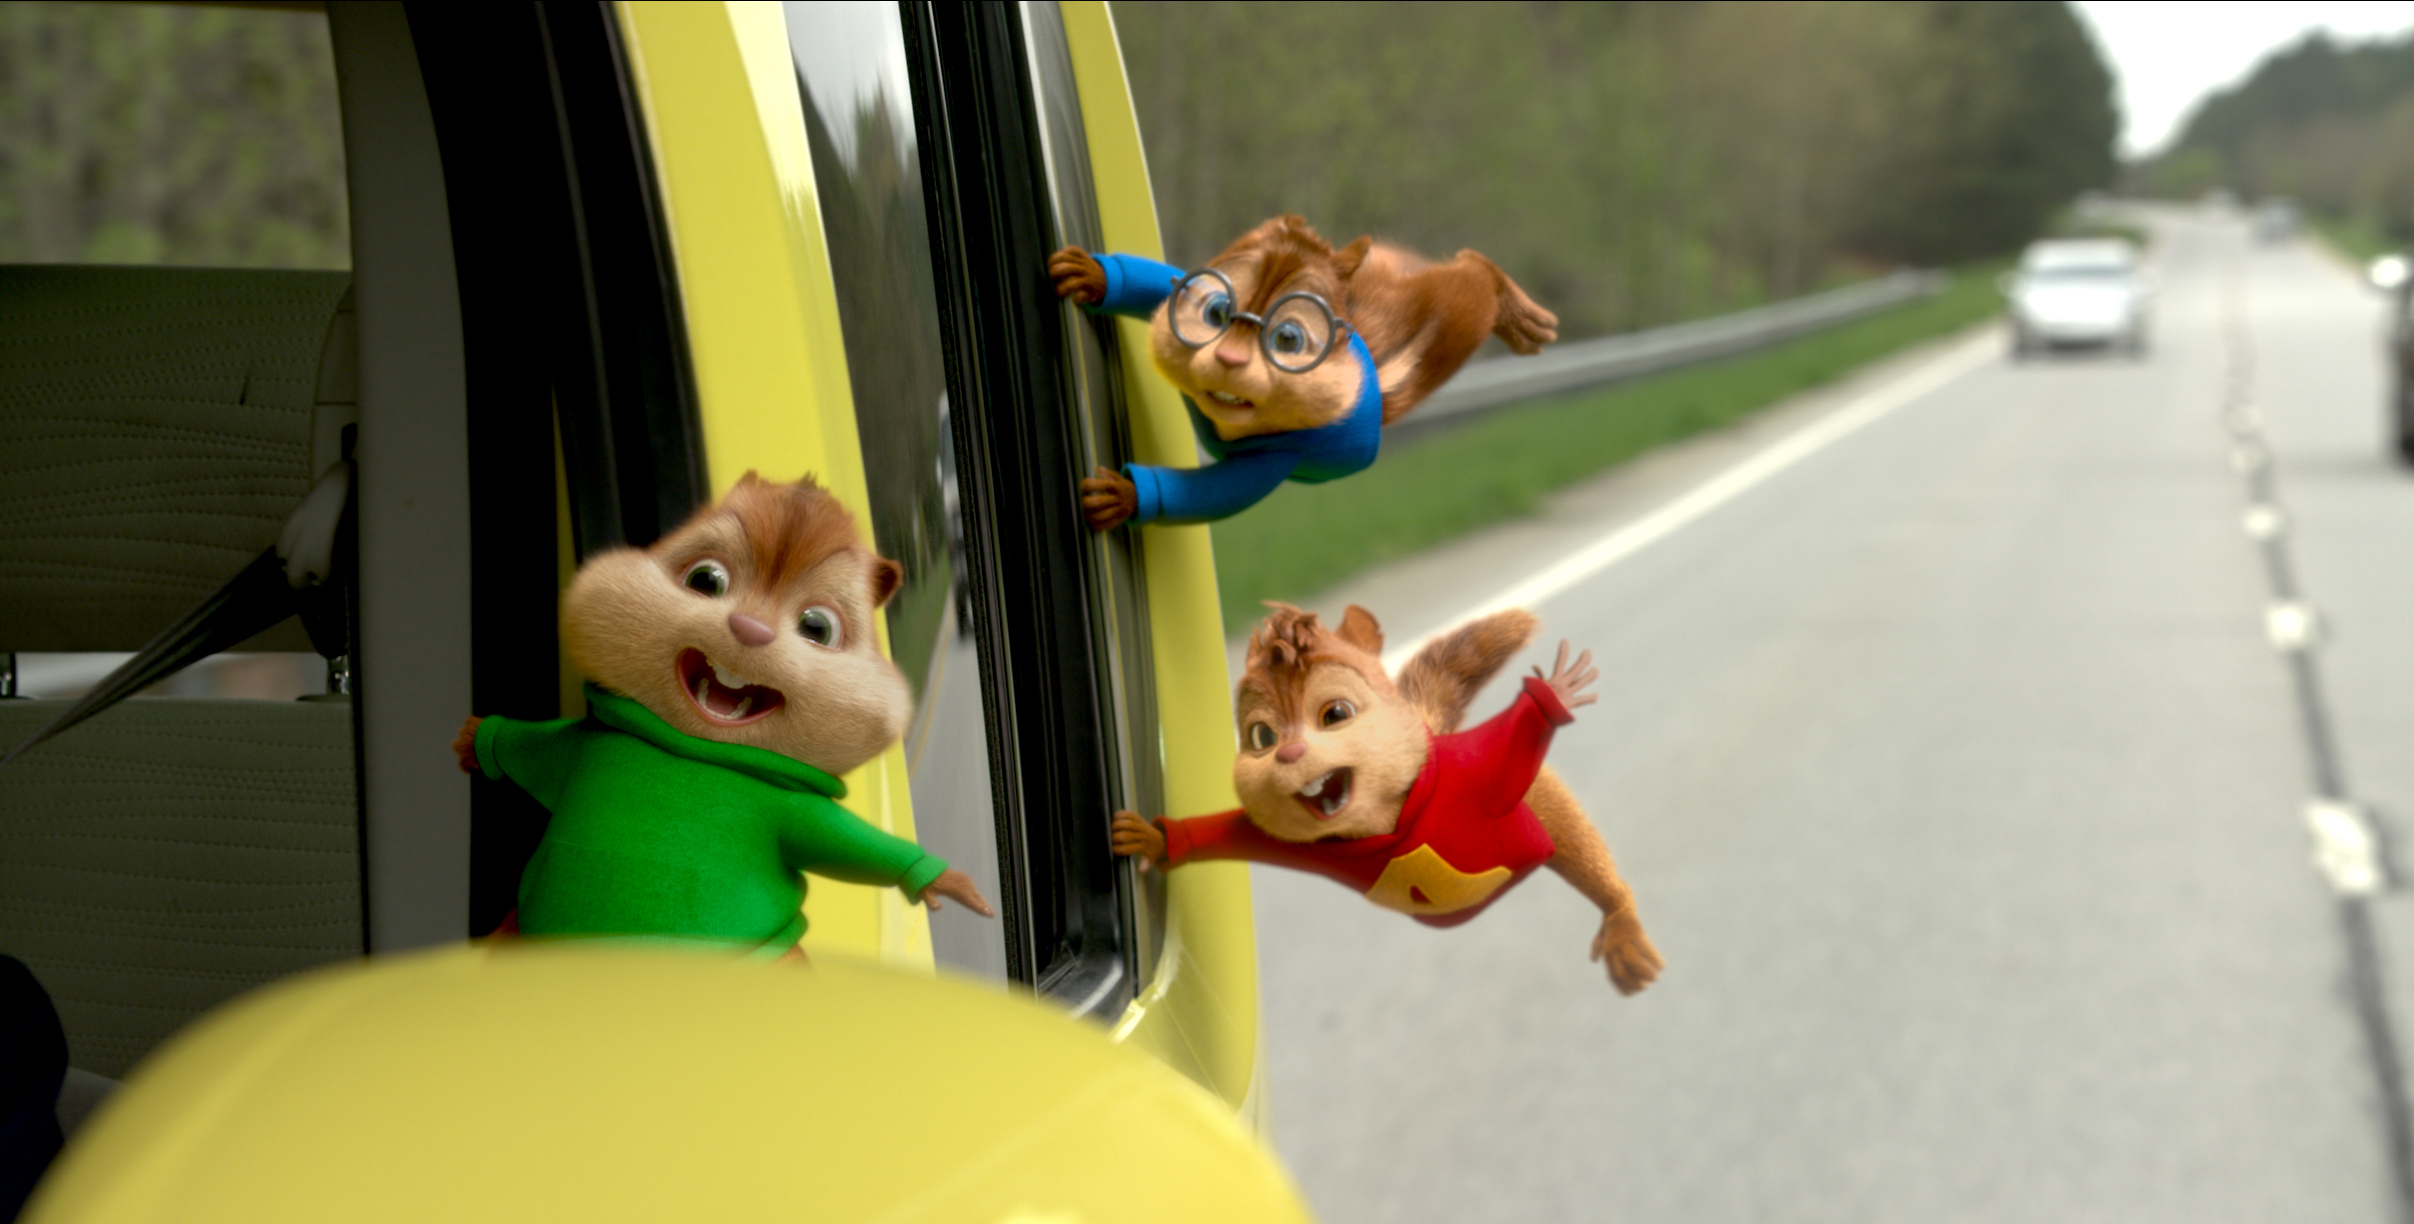 mk0060_v9787316.0079 Theodore, Alvin, and Simon go on a wild Òroad chipÓ in ALVIN AND THE CHIPMUNKS: THE ROAD CHIP. Photo Credit: Courtesy Twentieth Century Fox Alvin and the Chipmunks, the Chipettes and CharactersÊª &Ê© 2015 BagdasarianÊProductions, LLC.Ê All rights reserved.Ê© 2015 Twentieth Century Fox Film Corporation.Ê All rights reserved. ÊNot for sale or duplication.